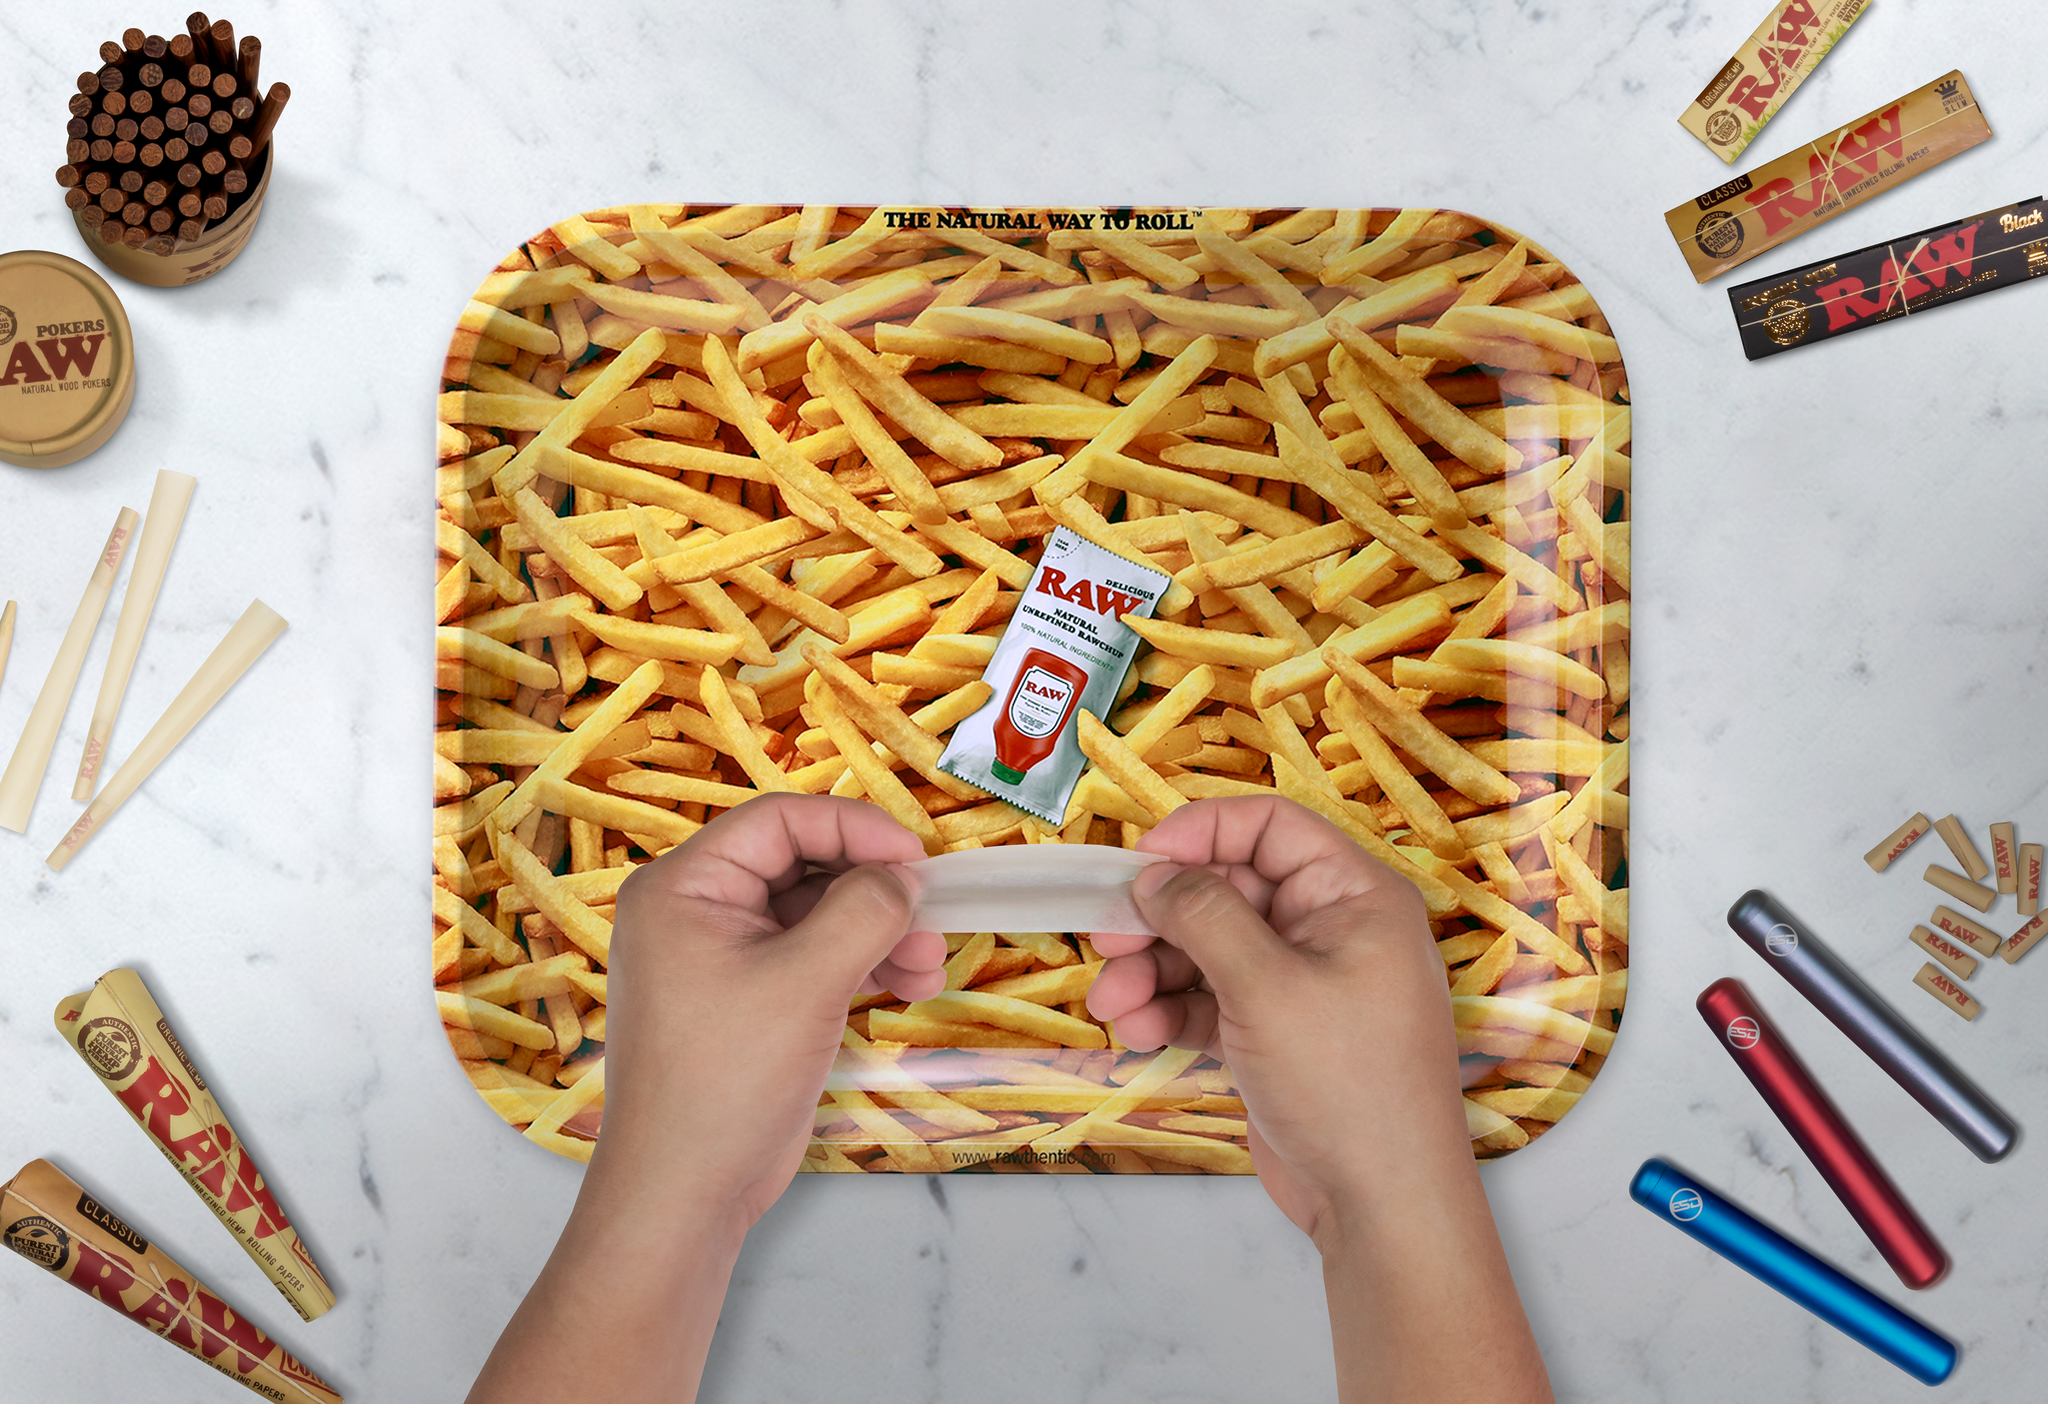 French Fries, Shop The Largest Collection